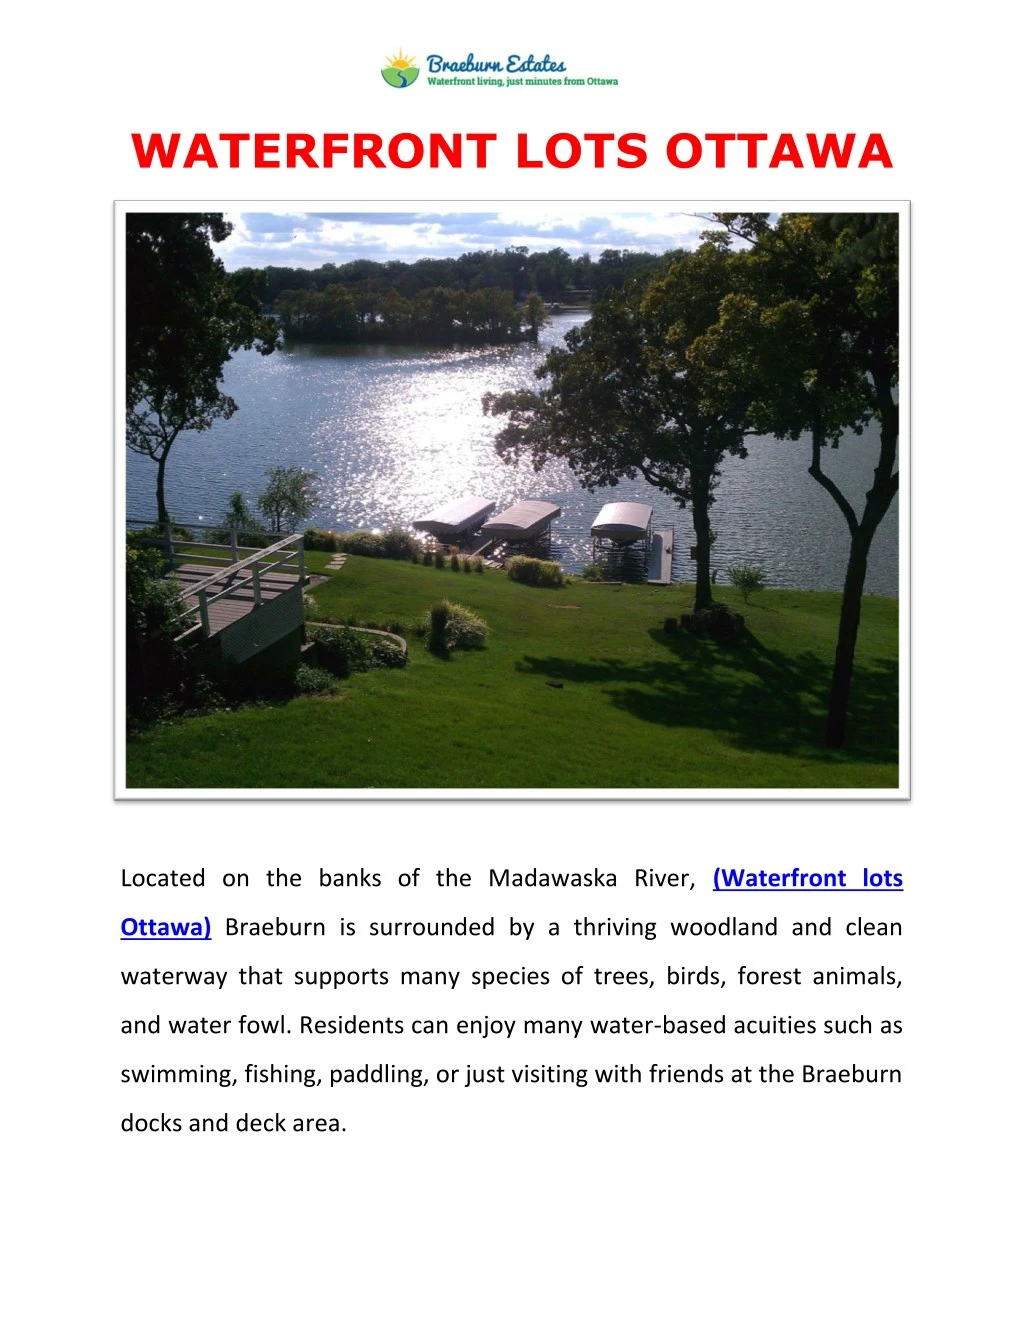 waterfront lots ottawa located on the banks